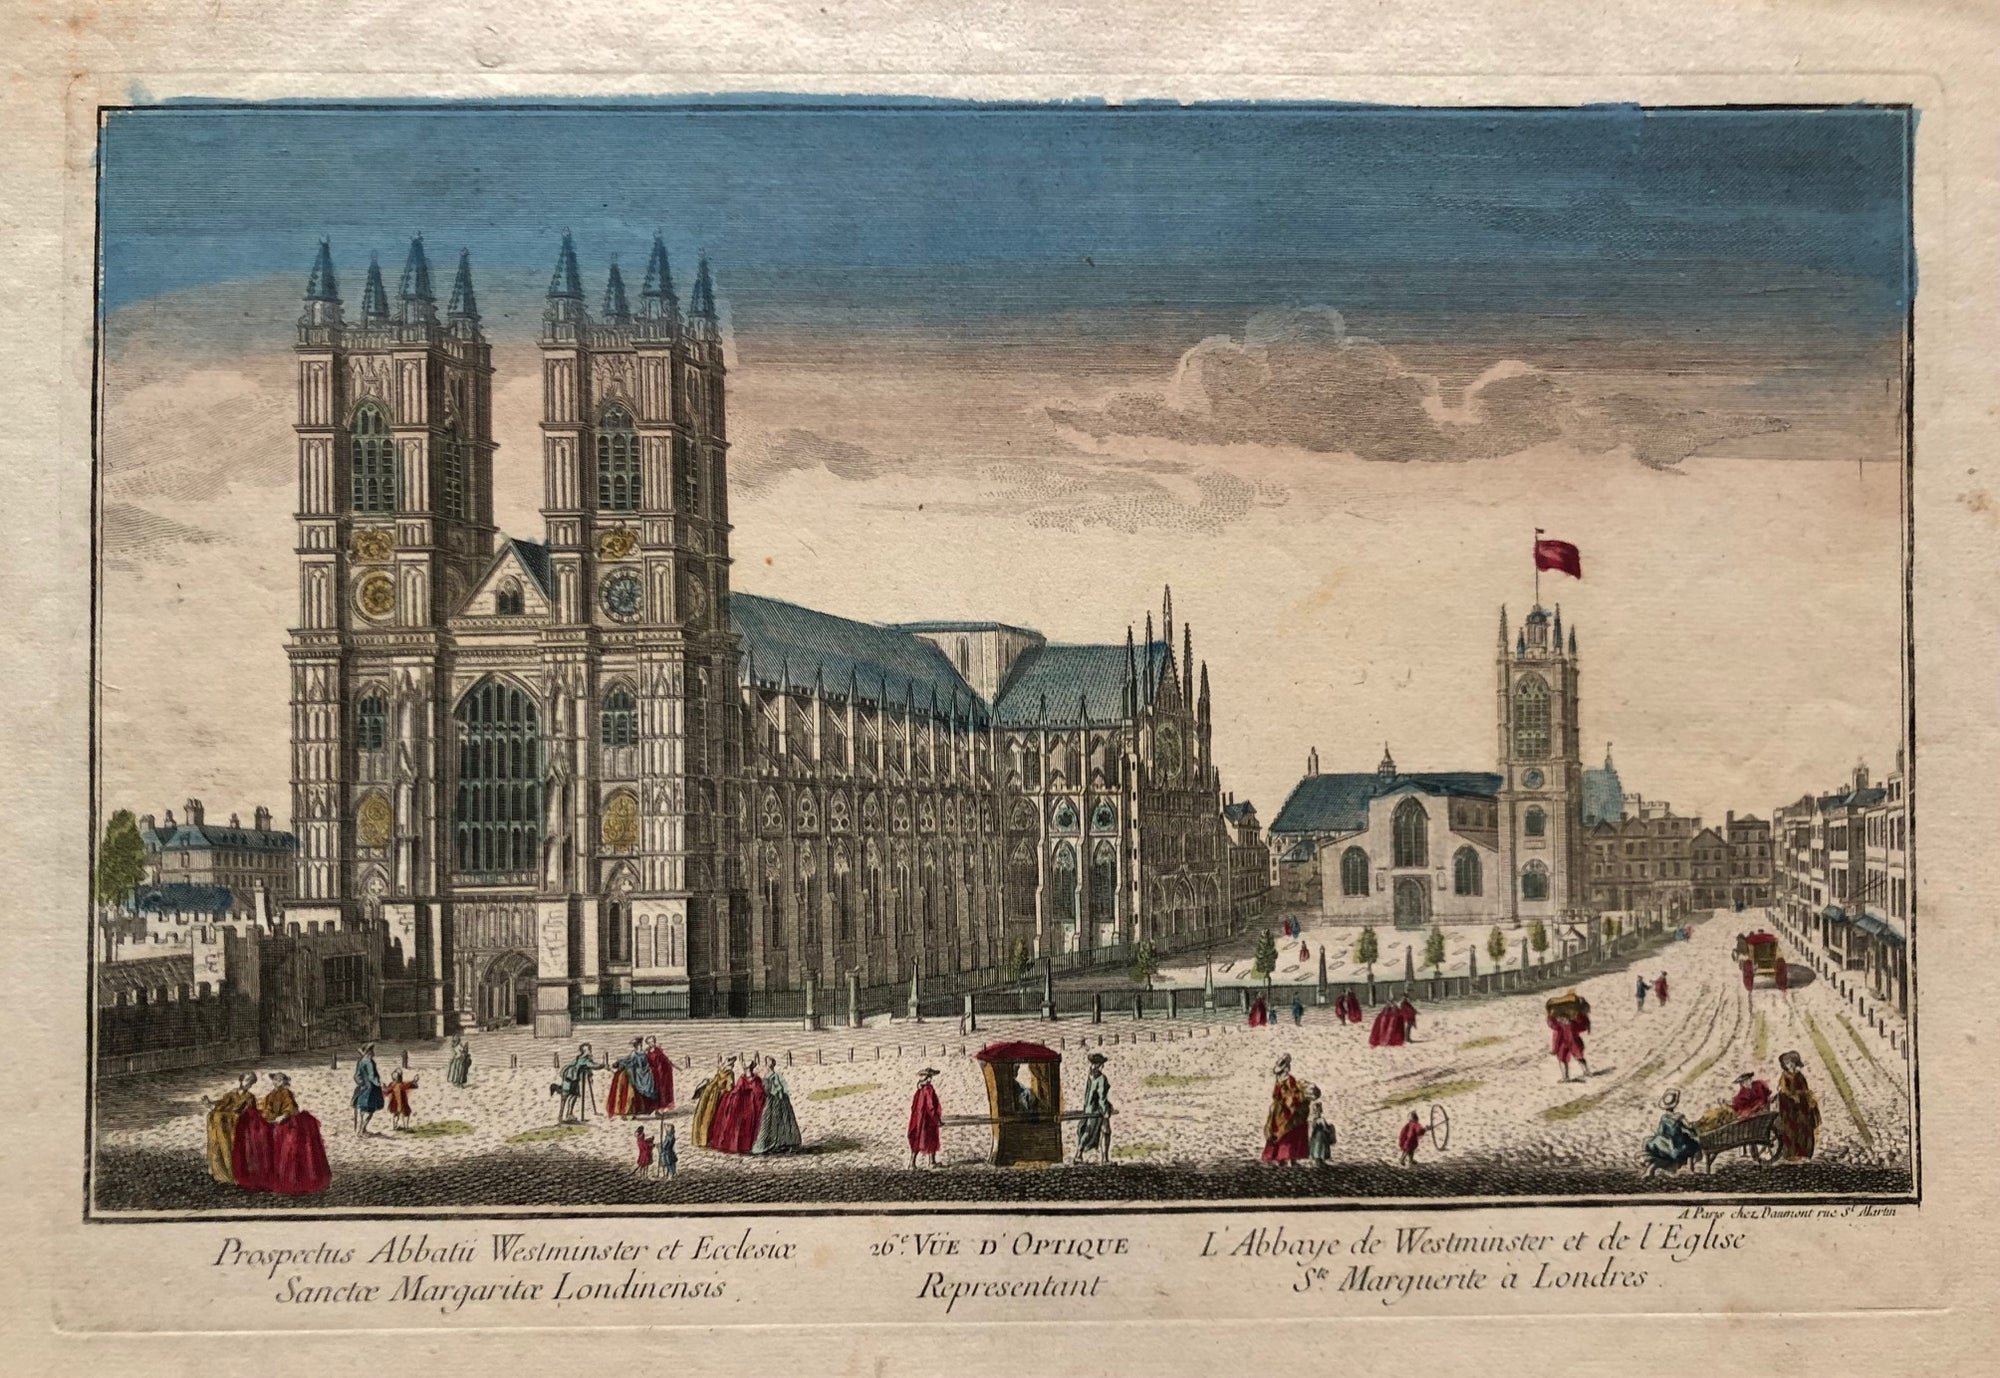  old print, antique print, london, londen, westminster, westminster abbey, view, city, oude prent, antieke prent, prent londen, prent london, engraving, optical, daumont,gravure